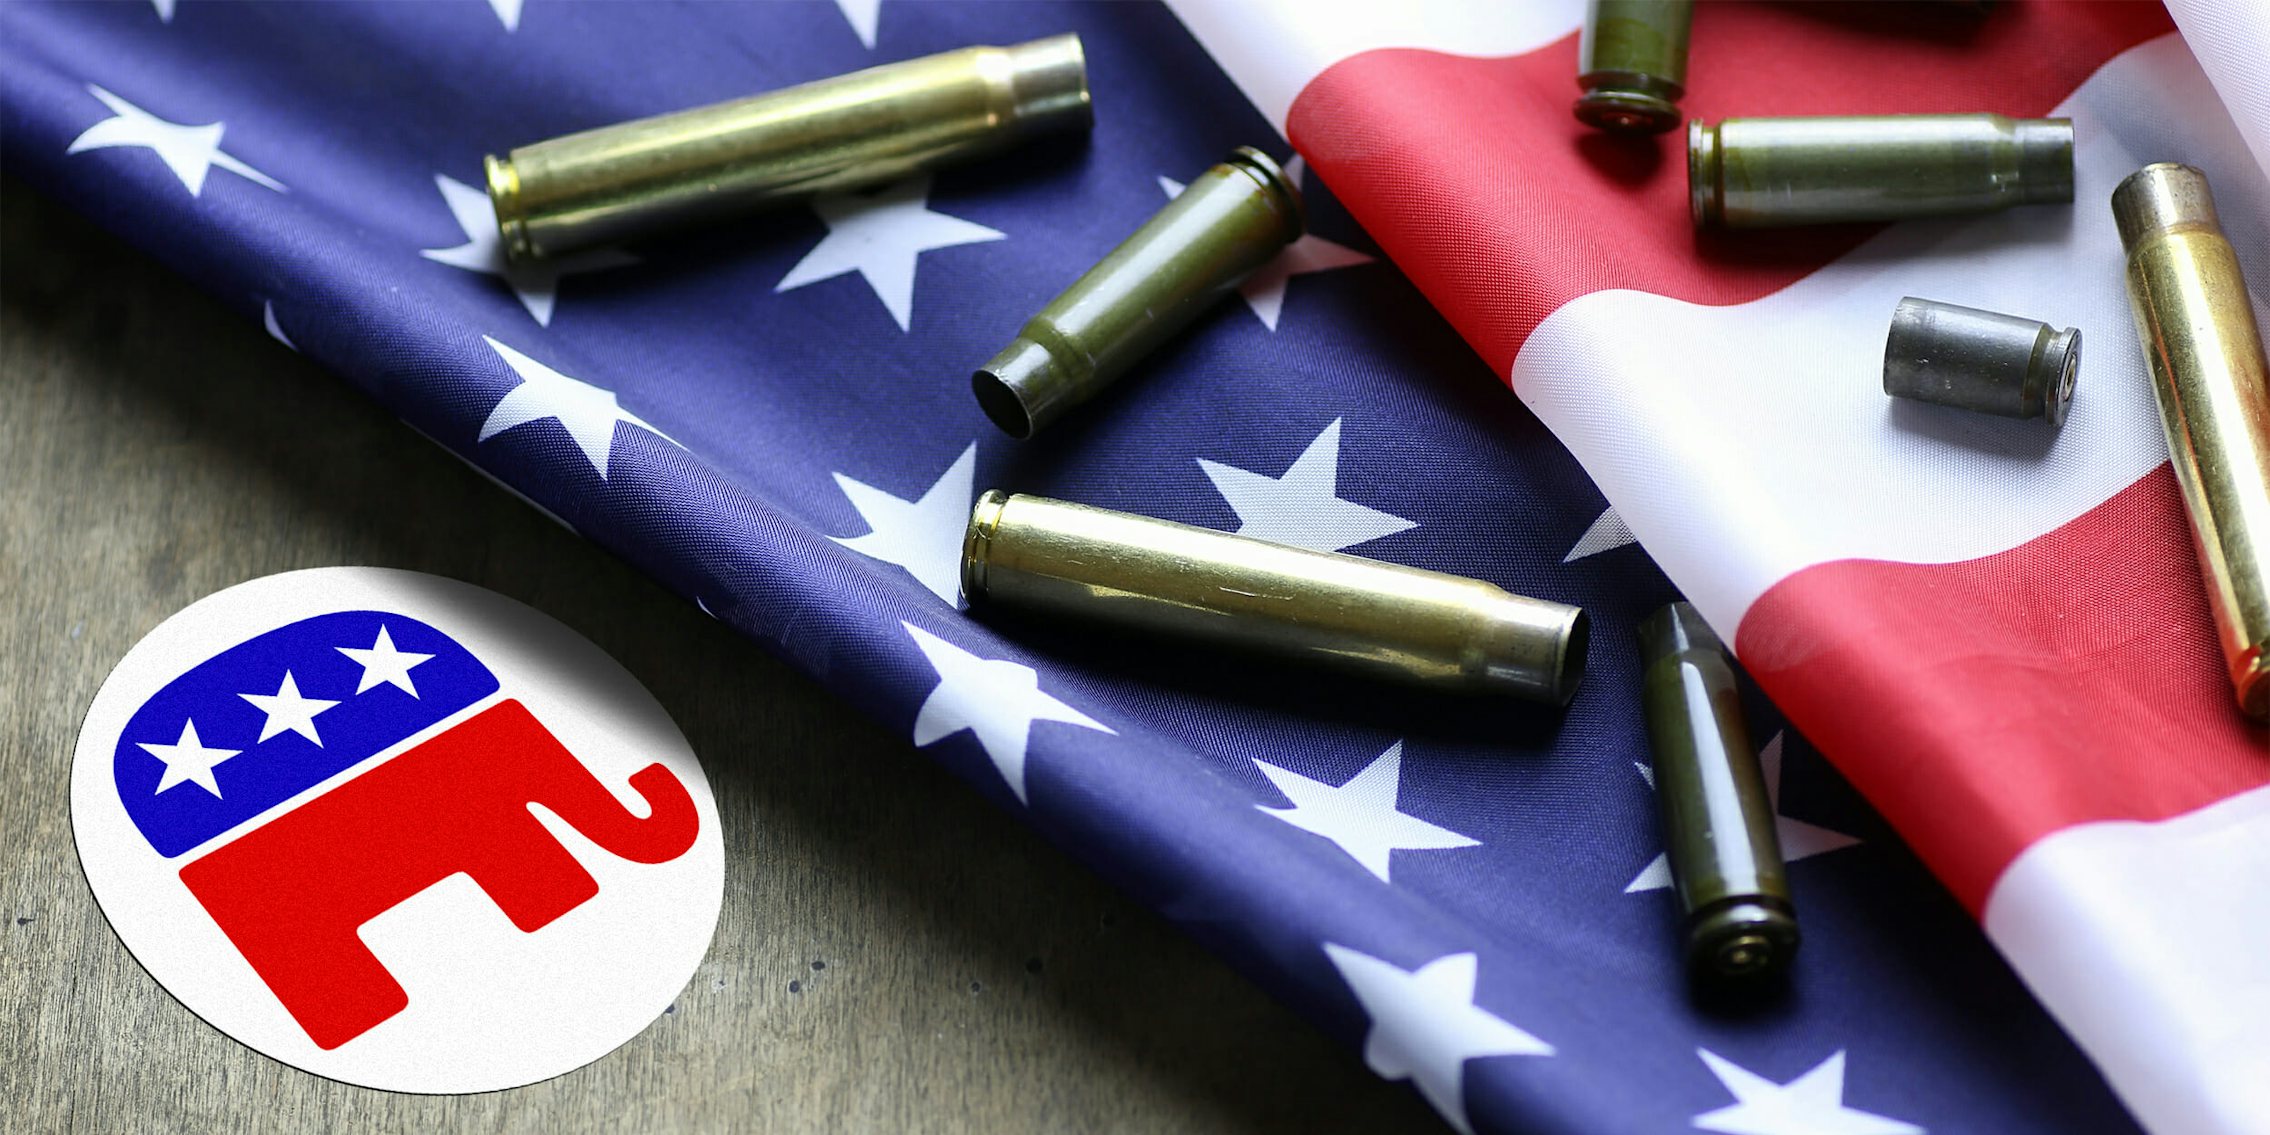 GOP logo sticker with American flag covered with shell casings